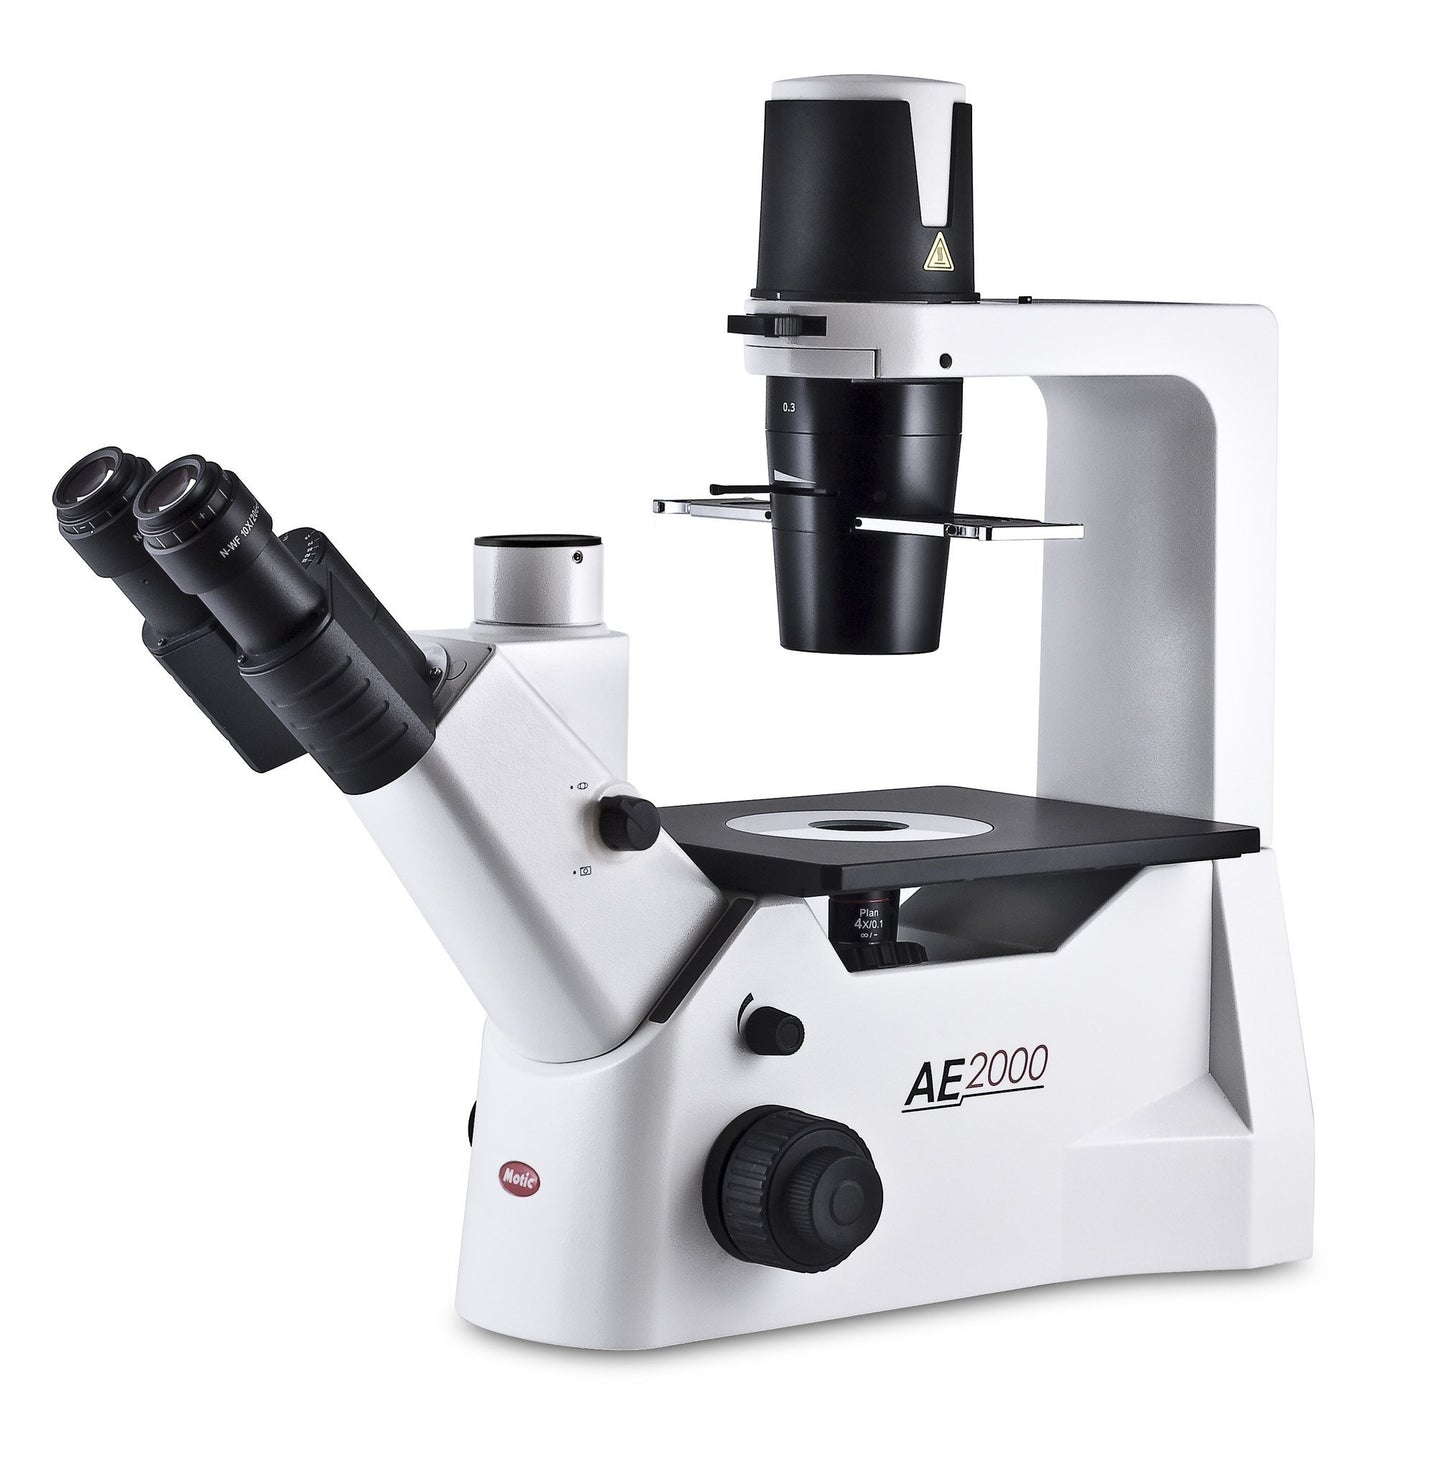 Motic AE2000 Inverted Microscope Series - Microscope Central
 - 2